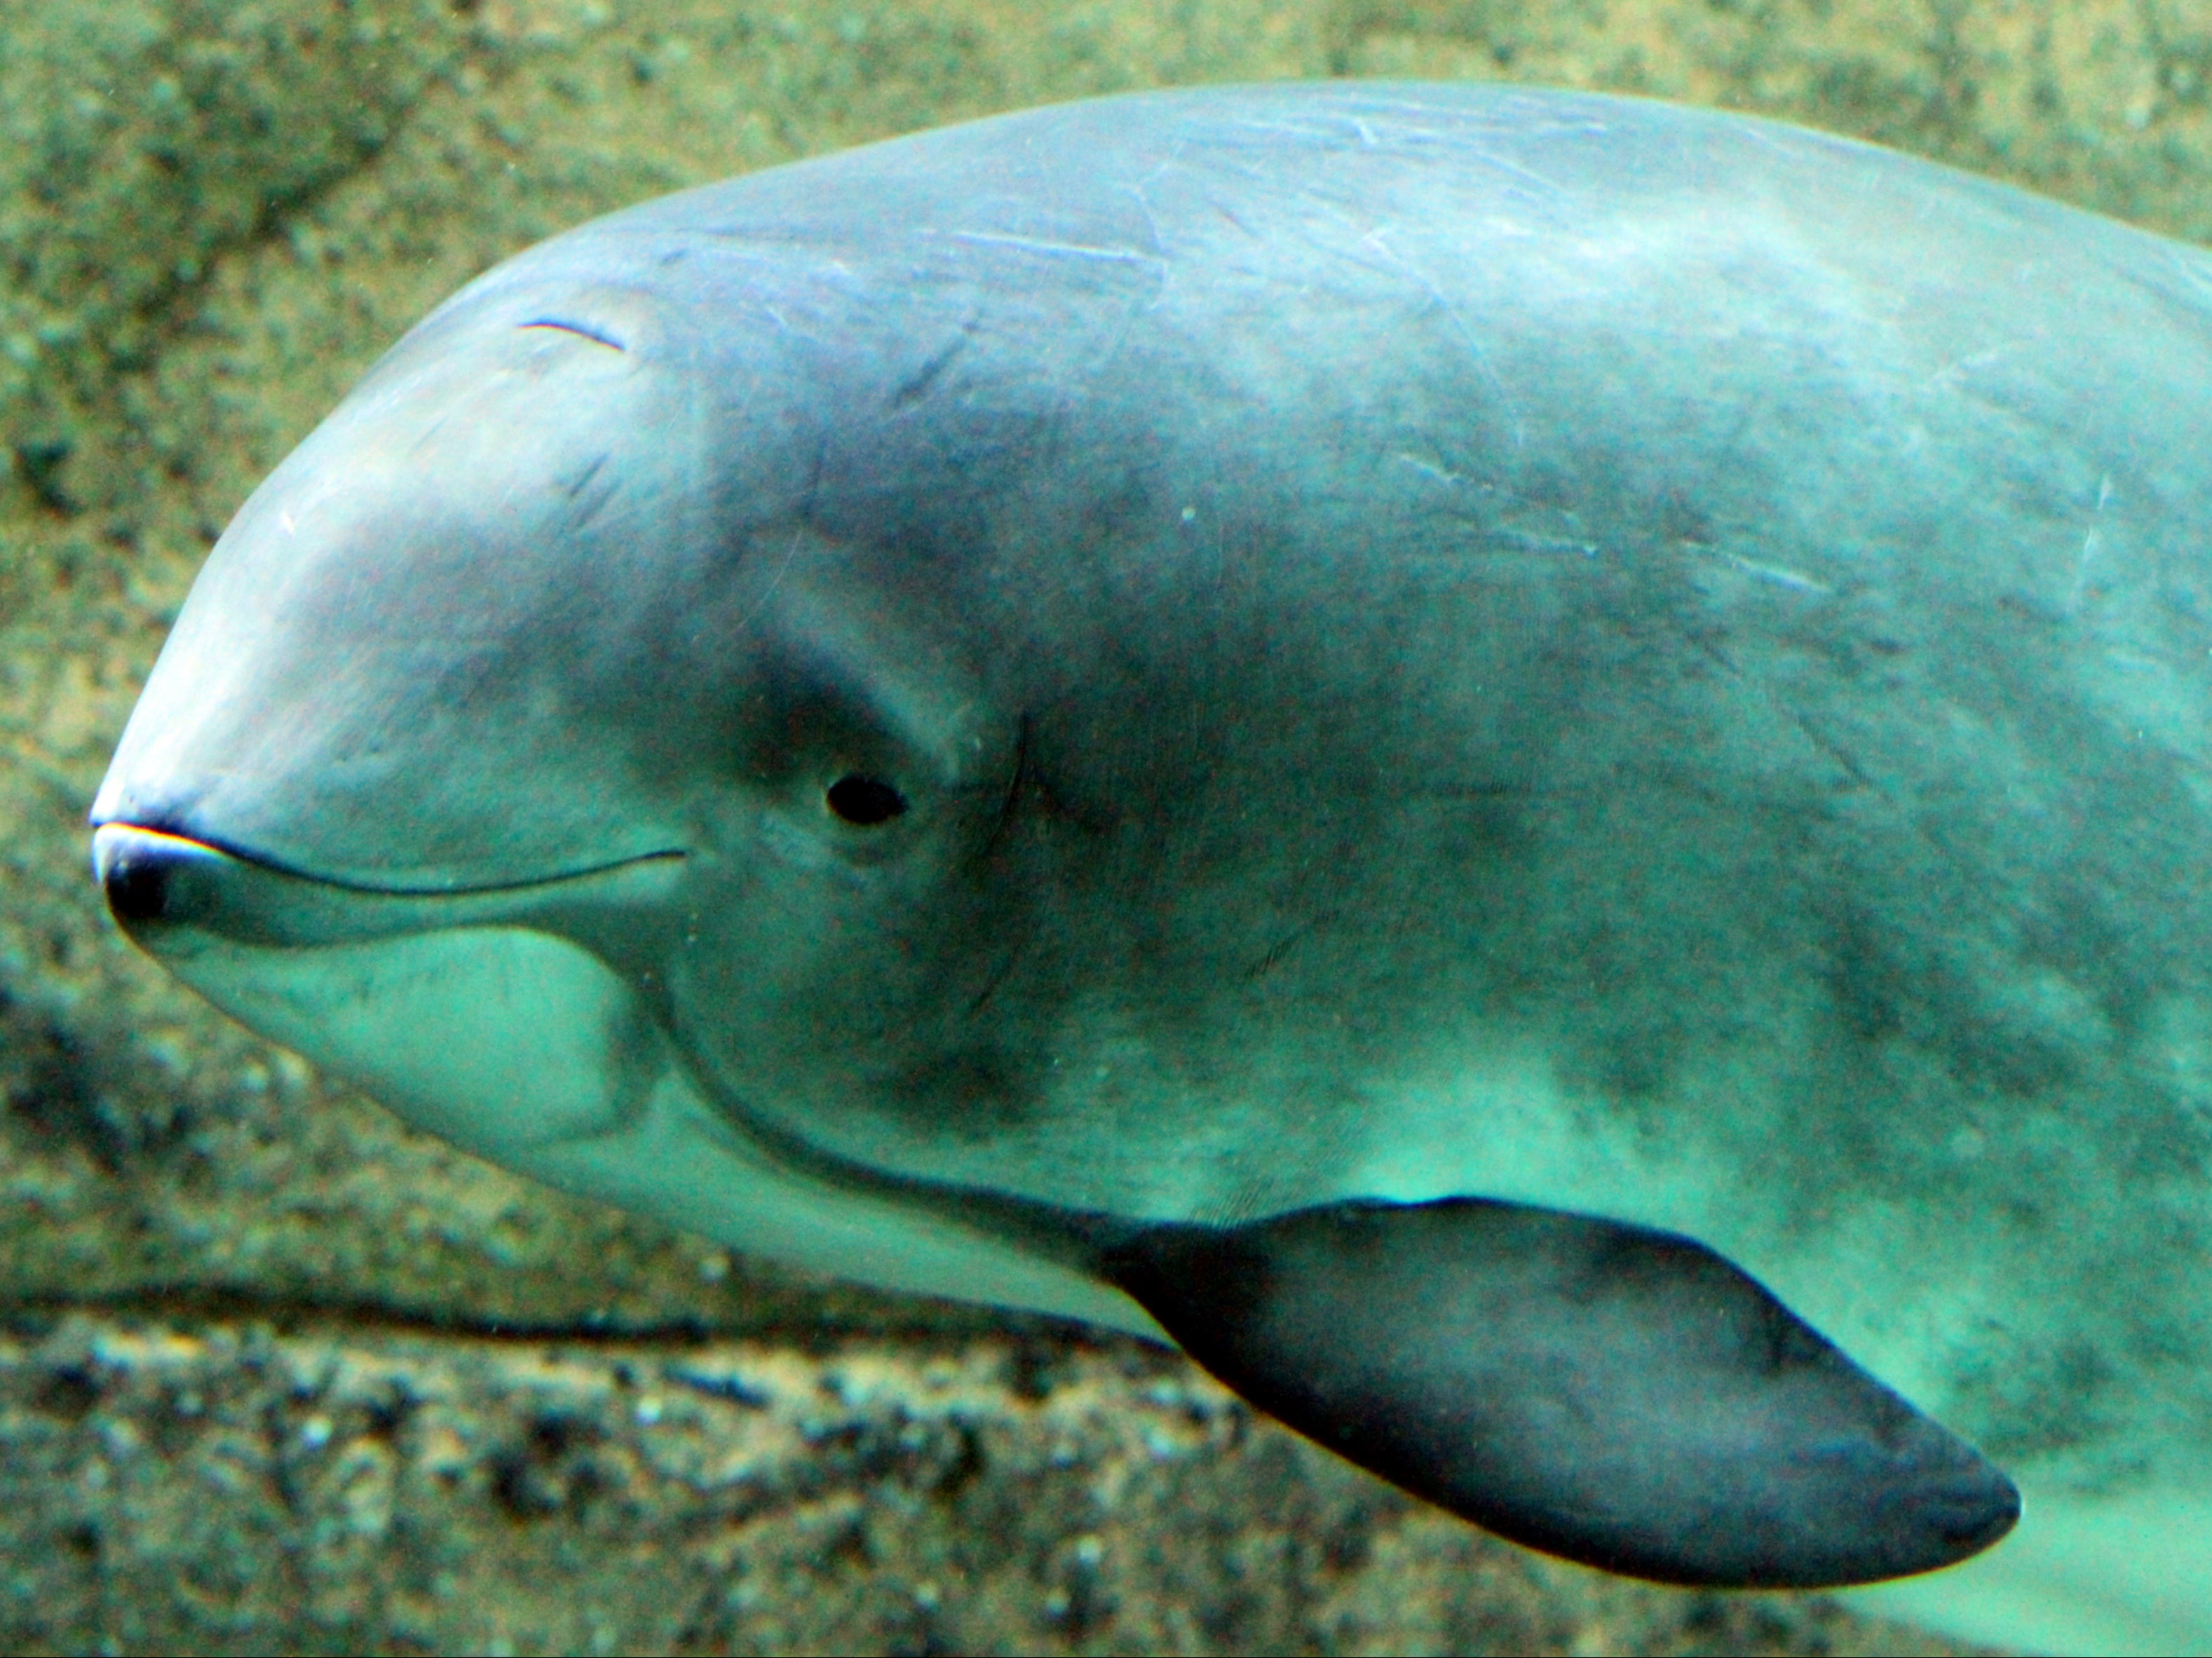 PCBs are associated with reduced testes weights in otherwise healthy porpoises